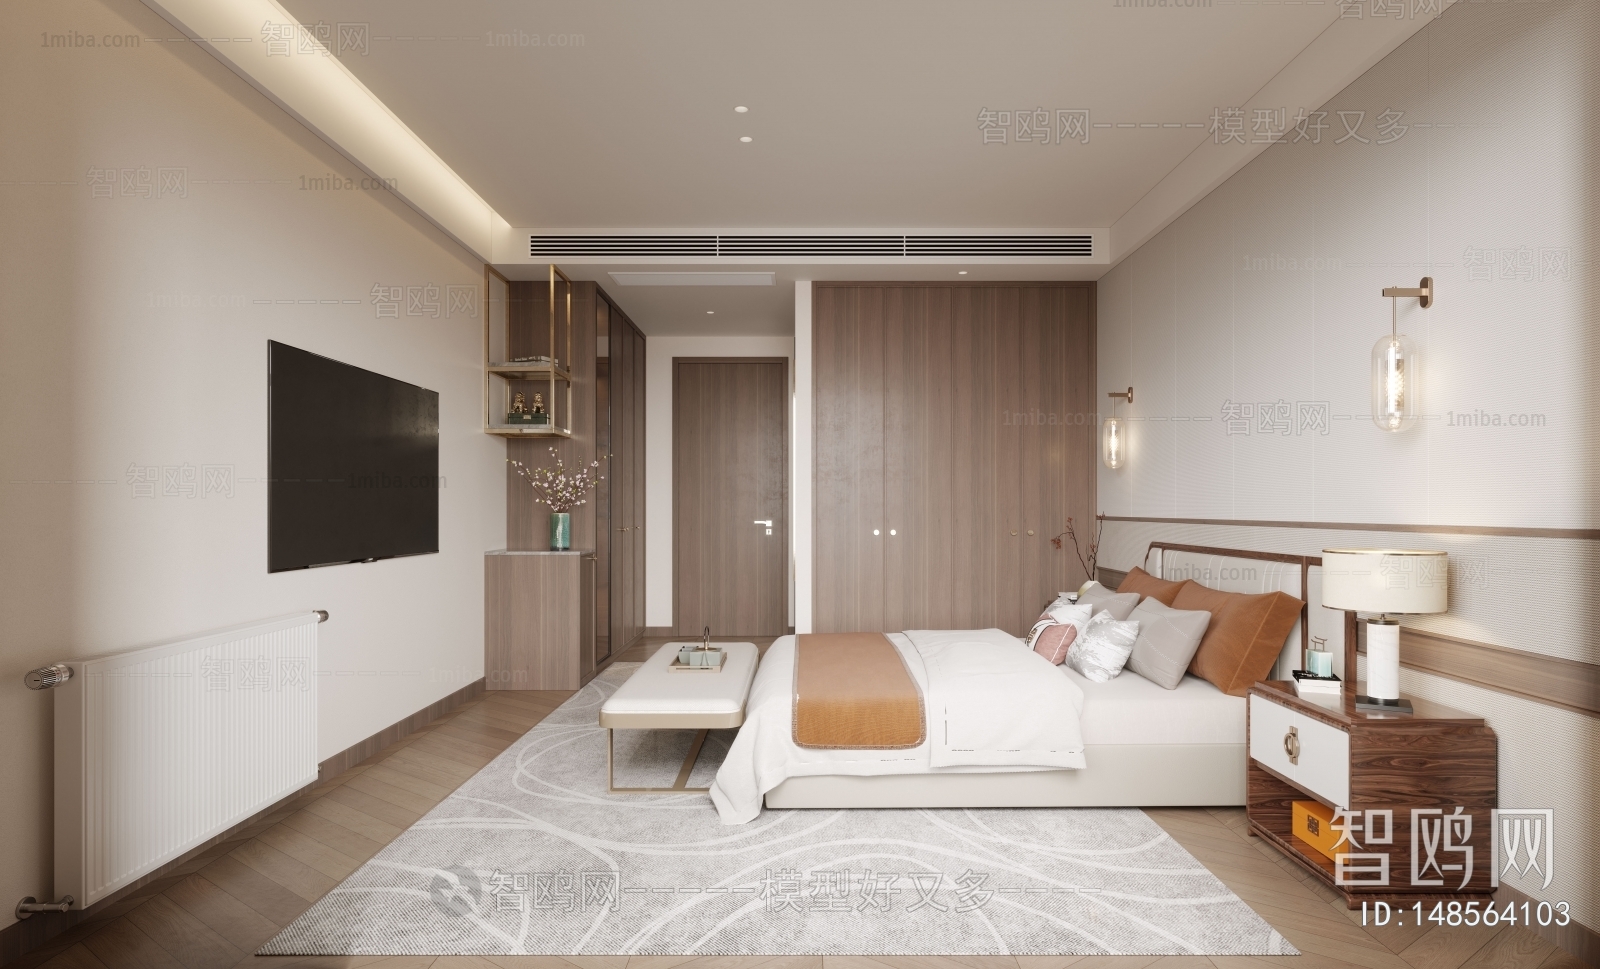 Modern New Chinese Style Bedroom